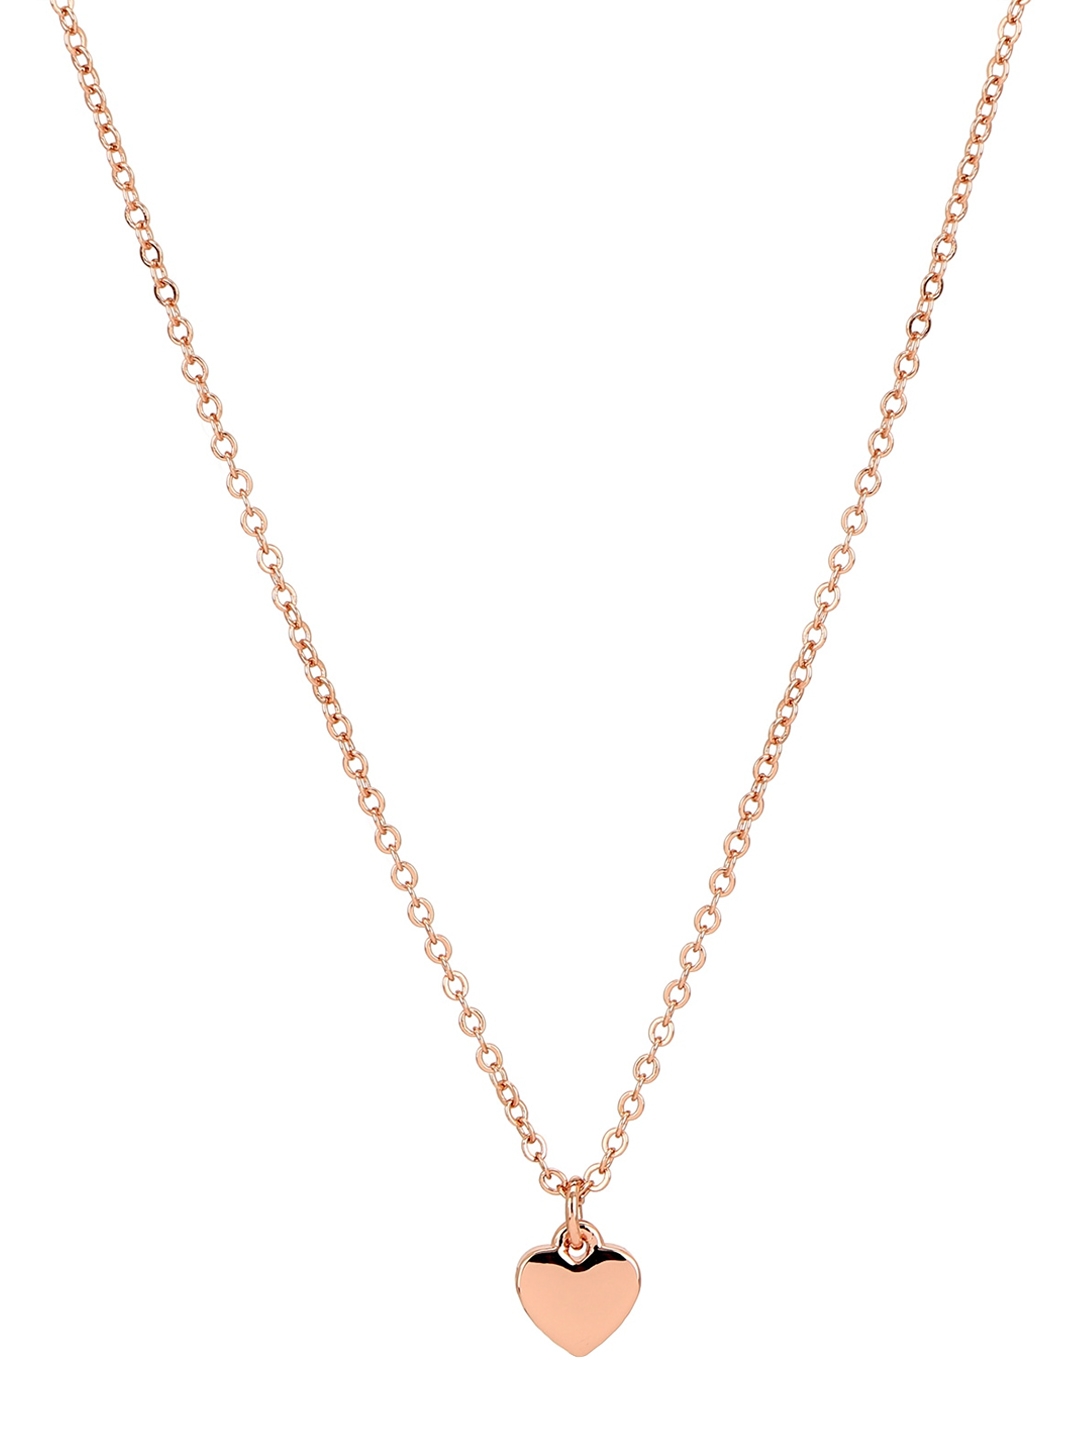 Ted Baker Rose Gold-Toned Copper-Plated Heart Pendant With Chain